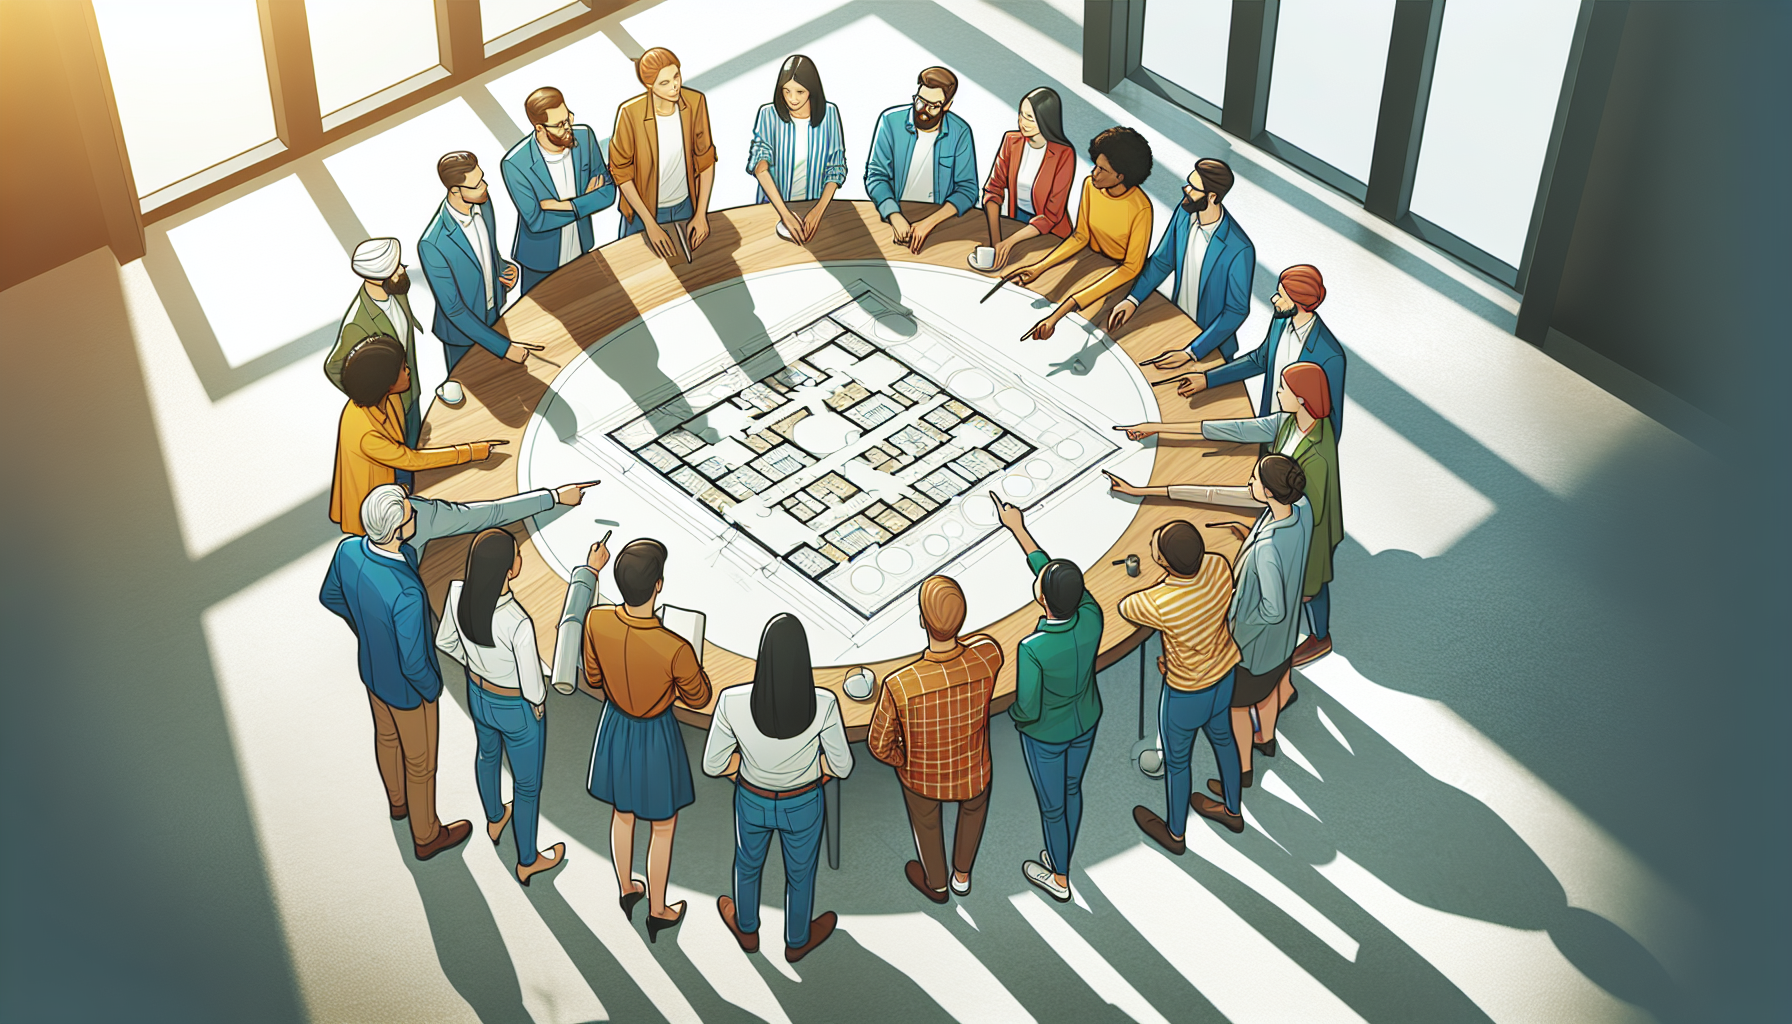 Illustration of a group of diverse people collaborating on a project